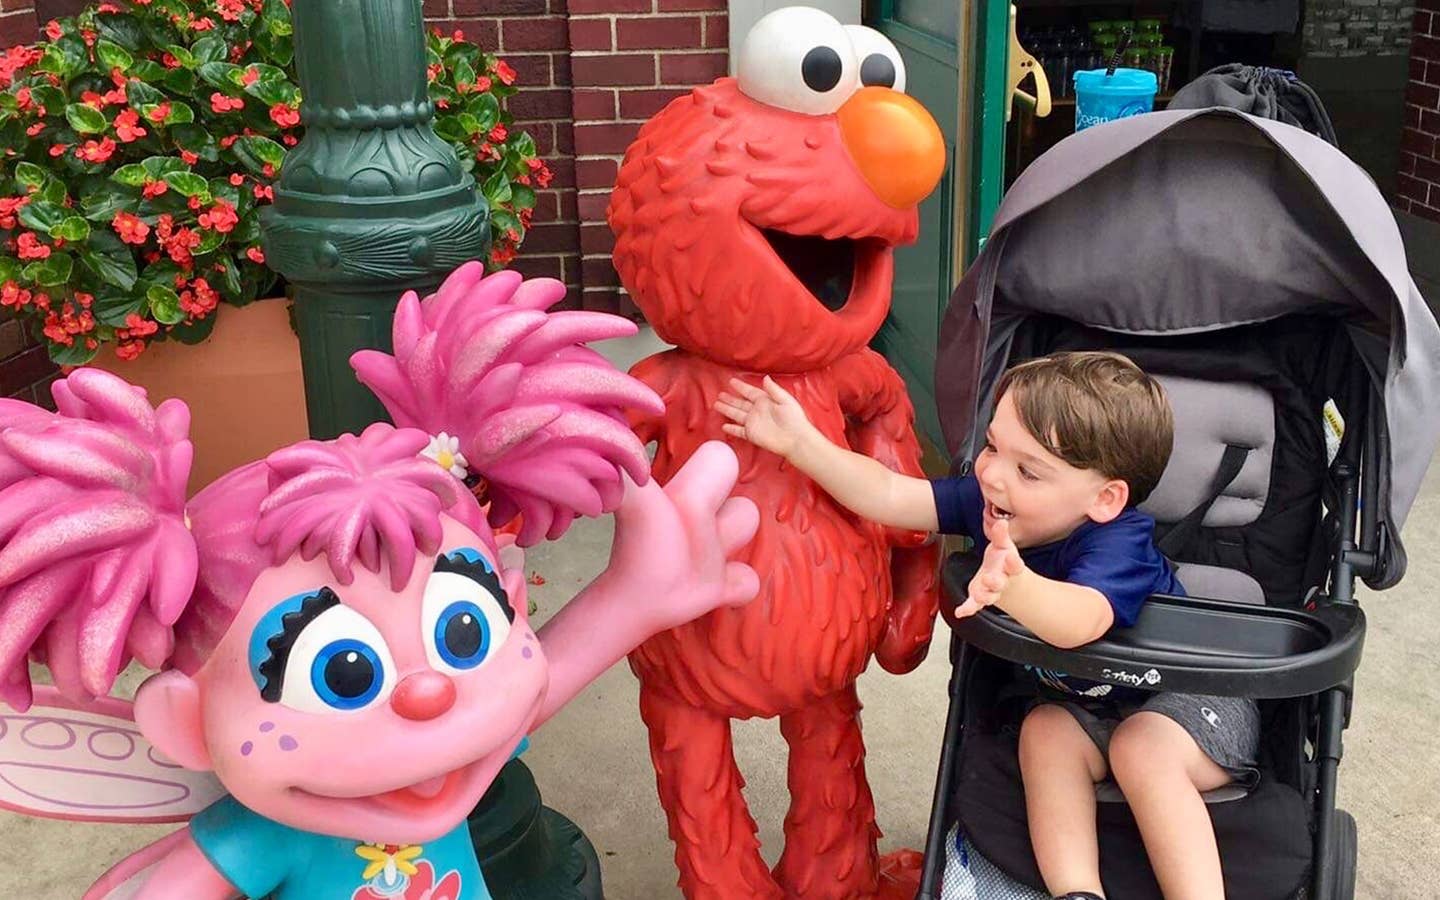 Dakota, Theresa's son, reaches from his stroller to embrace Elmo and Abby Cadabby outside Sesame Street Land.